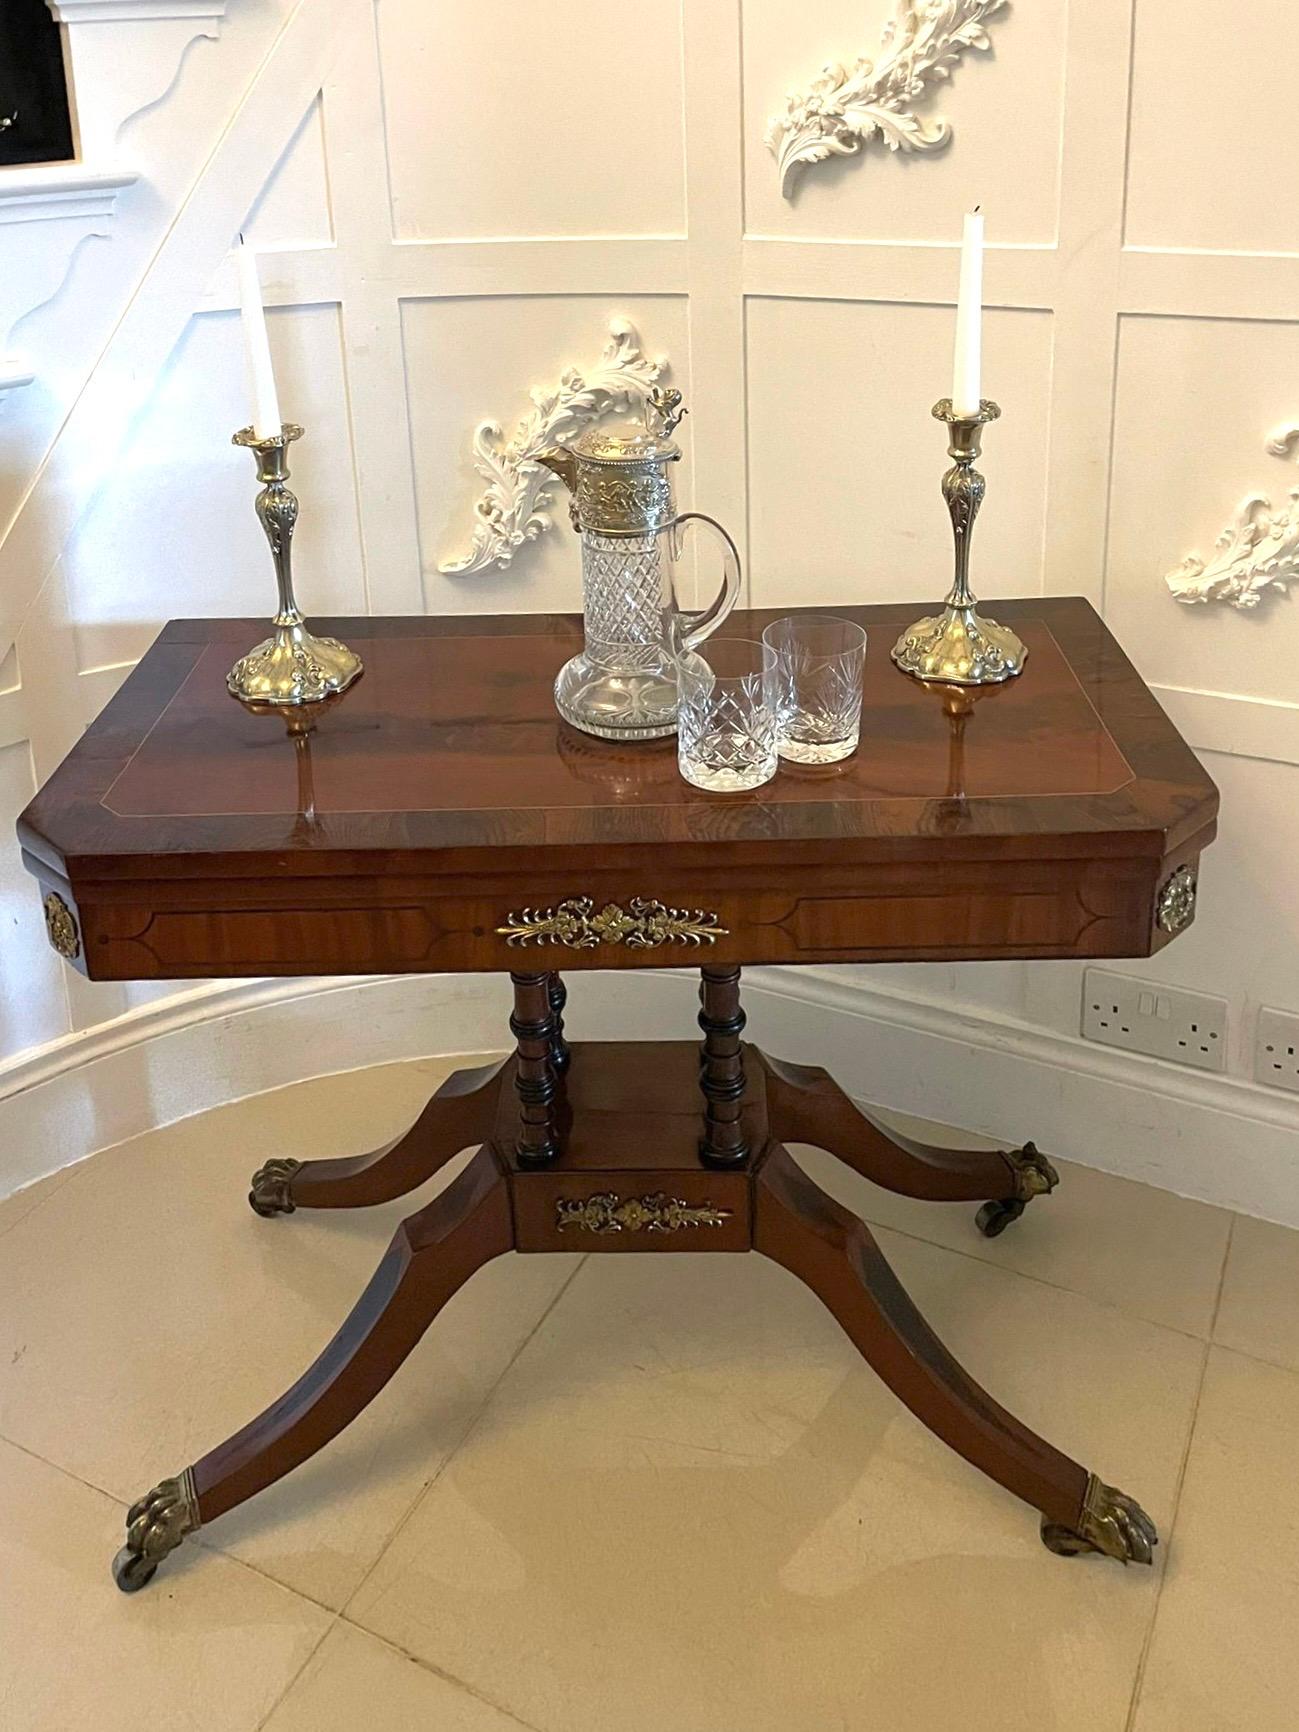 Fine quality antique regency figured mahogany card/console table with gilded brass mounts having a fine quality figured mahogany swizzle top crossbanded in rosewood and satinwood  inlaid stringing opening to reveal a red baize interior, mahogany